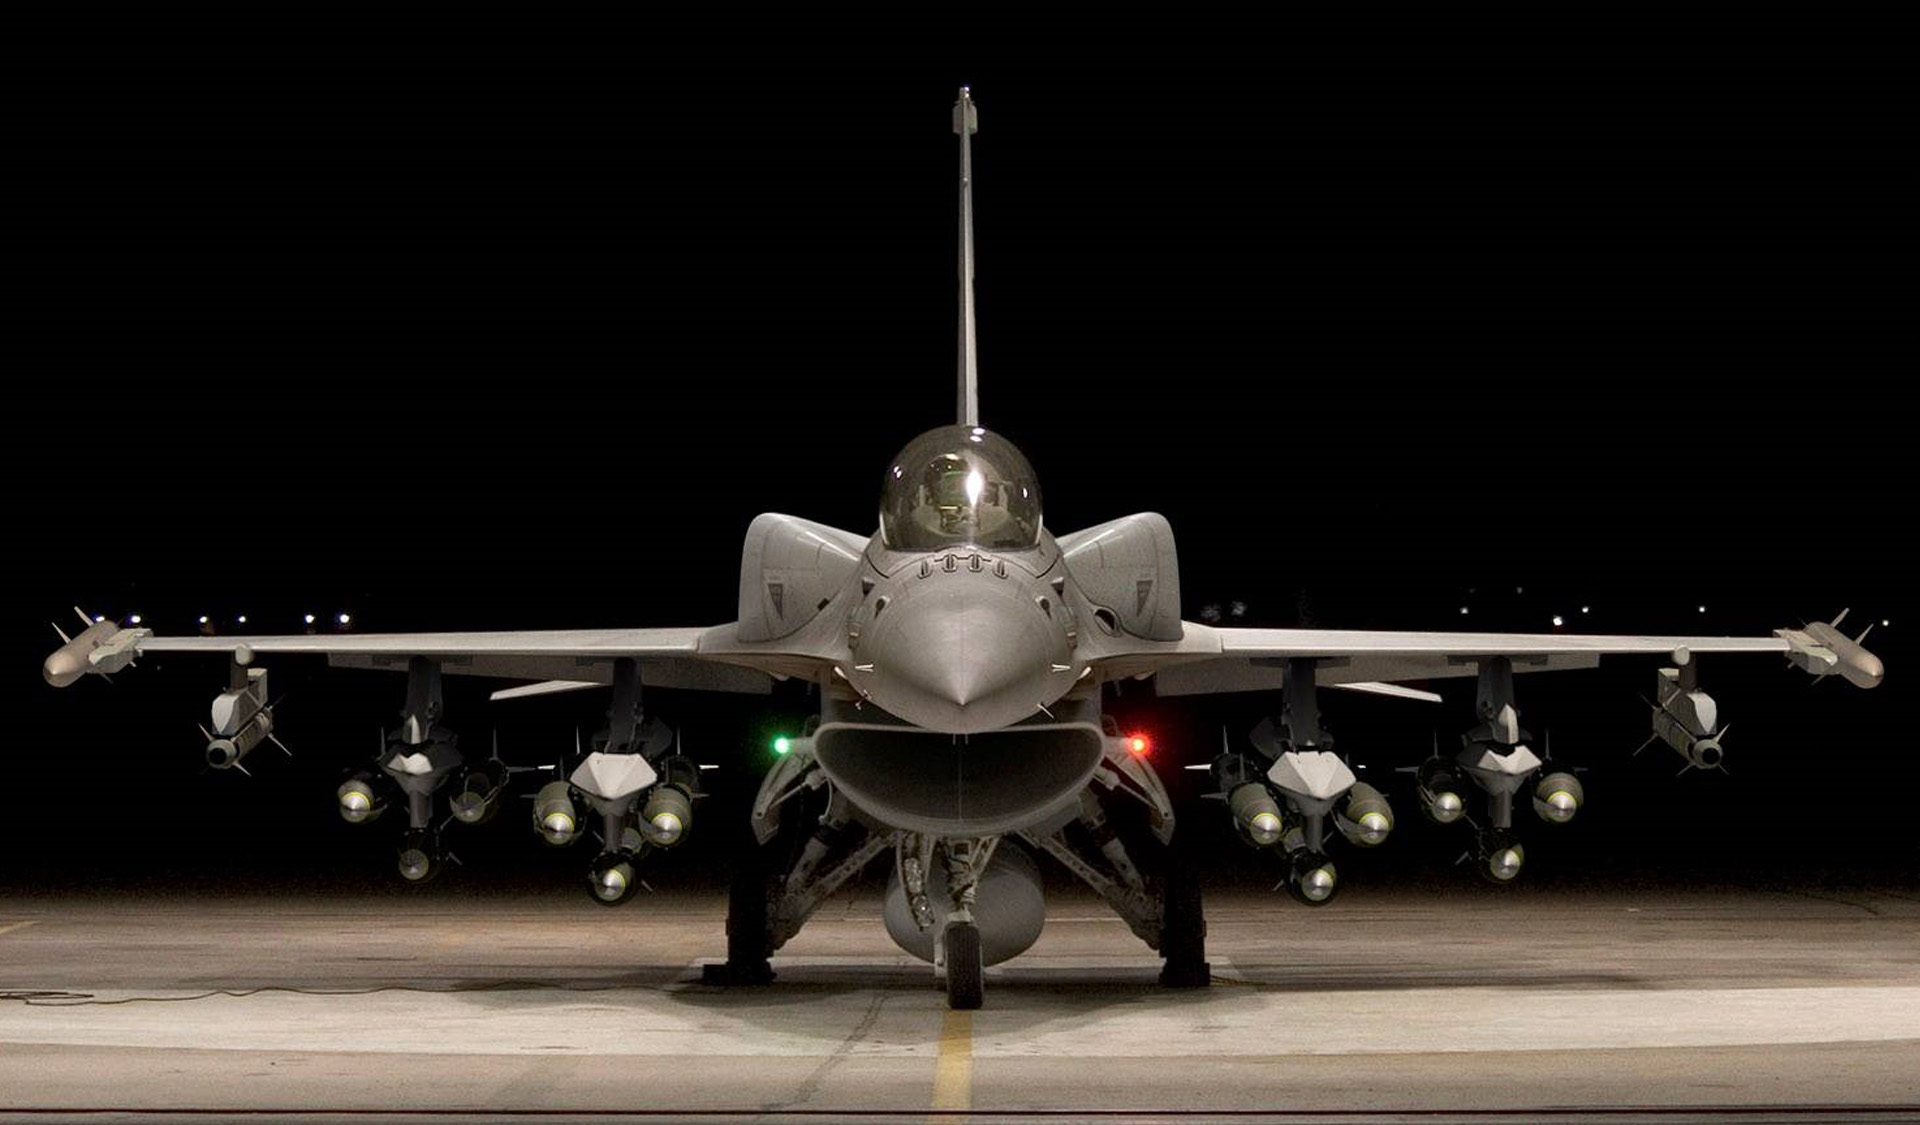 Meet the The Most Technologically Advanced 4th Generation Fighter in the World | Lockheed